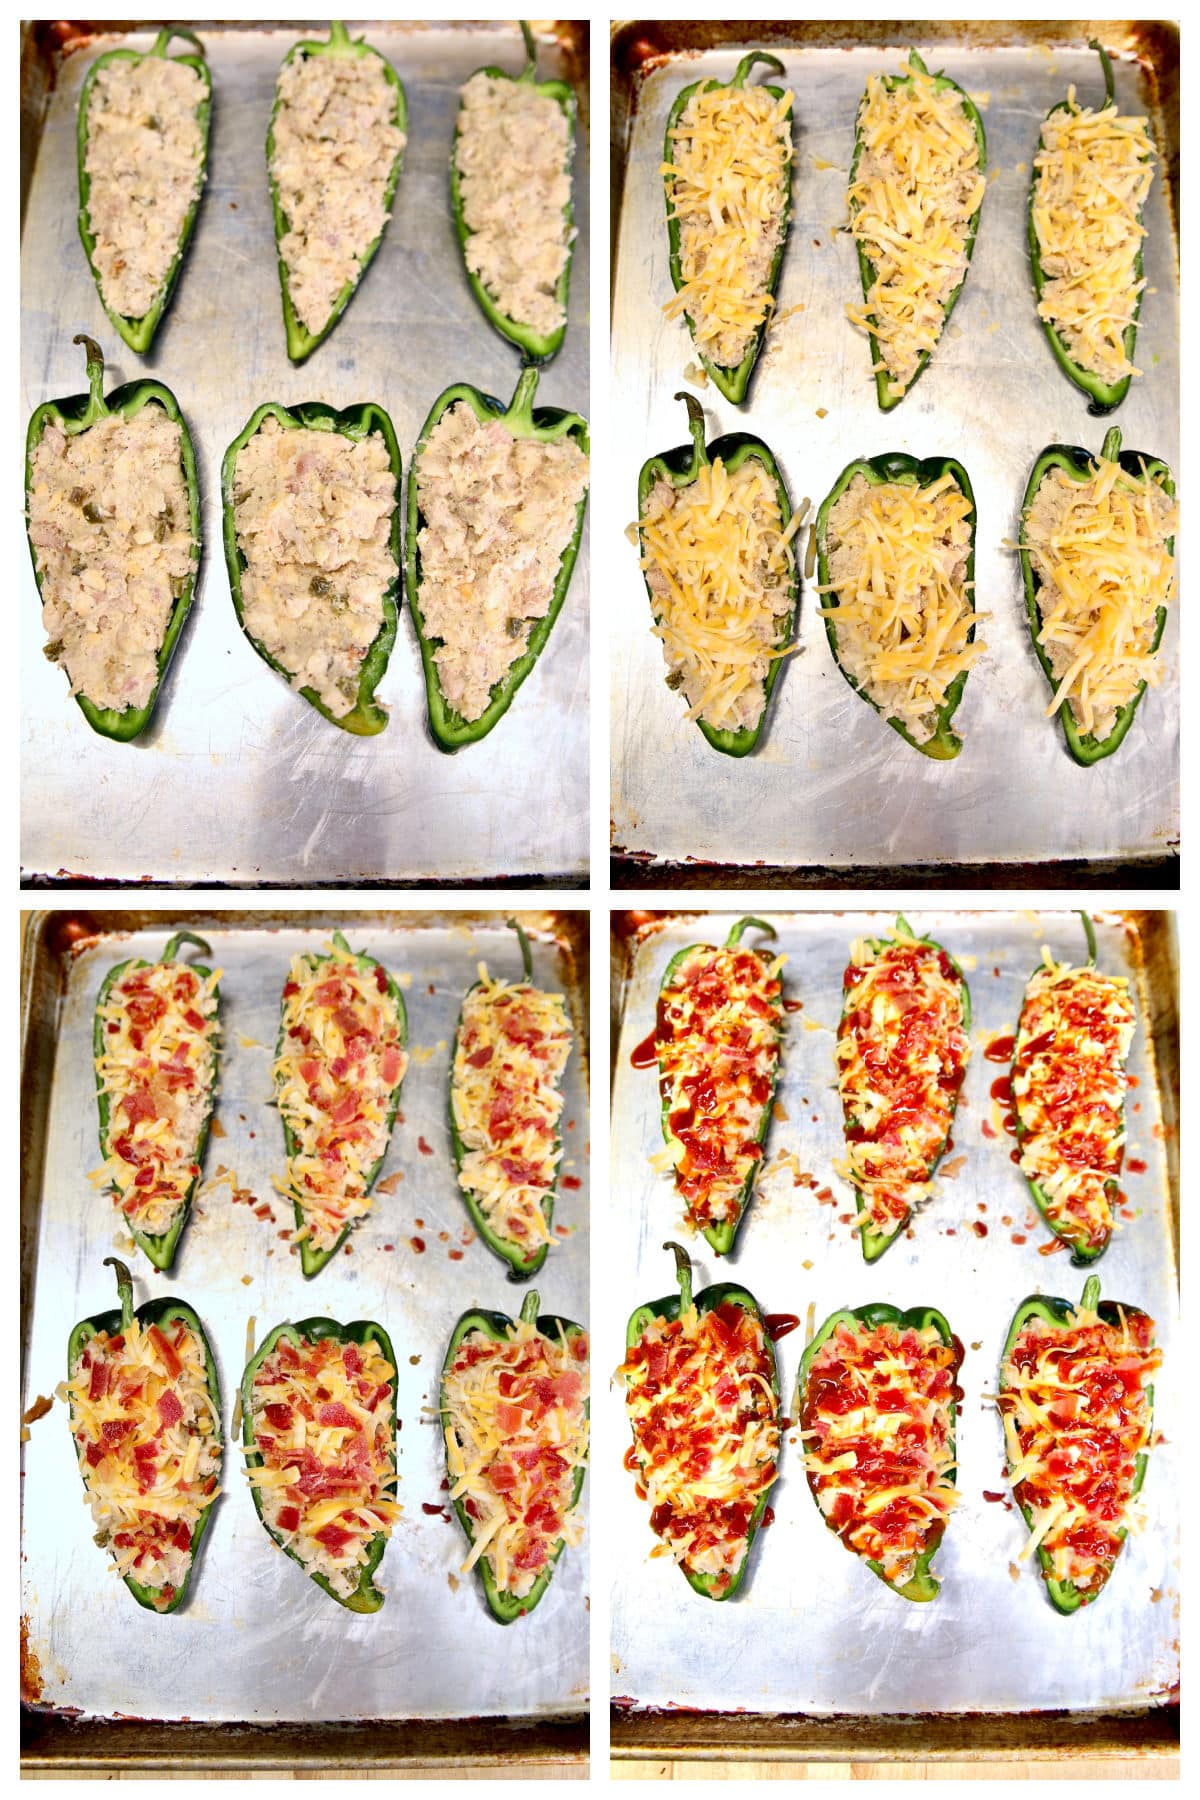 Collage stuffing poblano peppers with chicken and cheese filling.